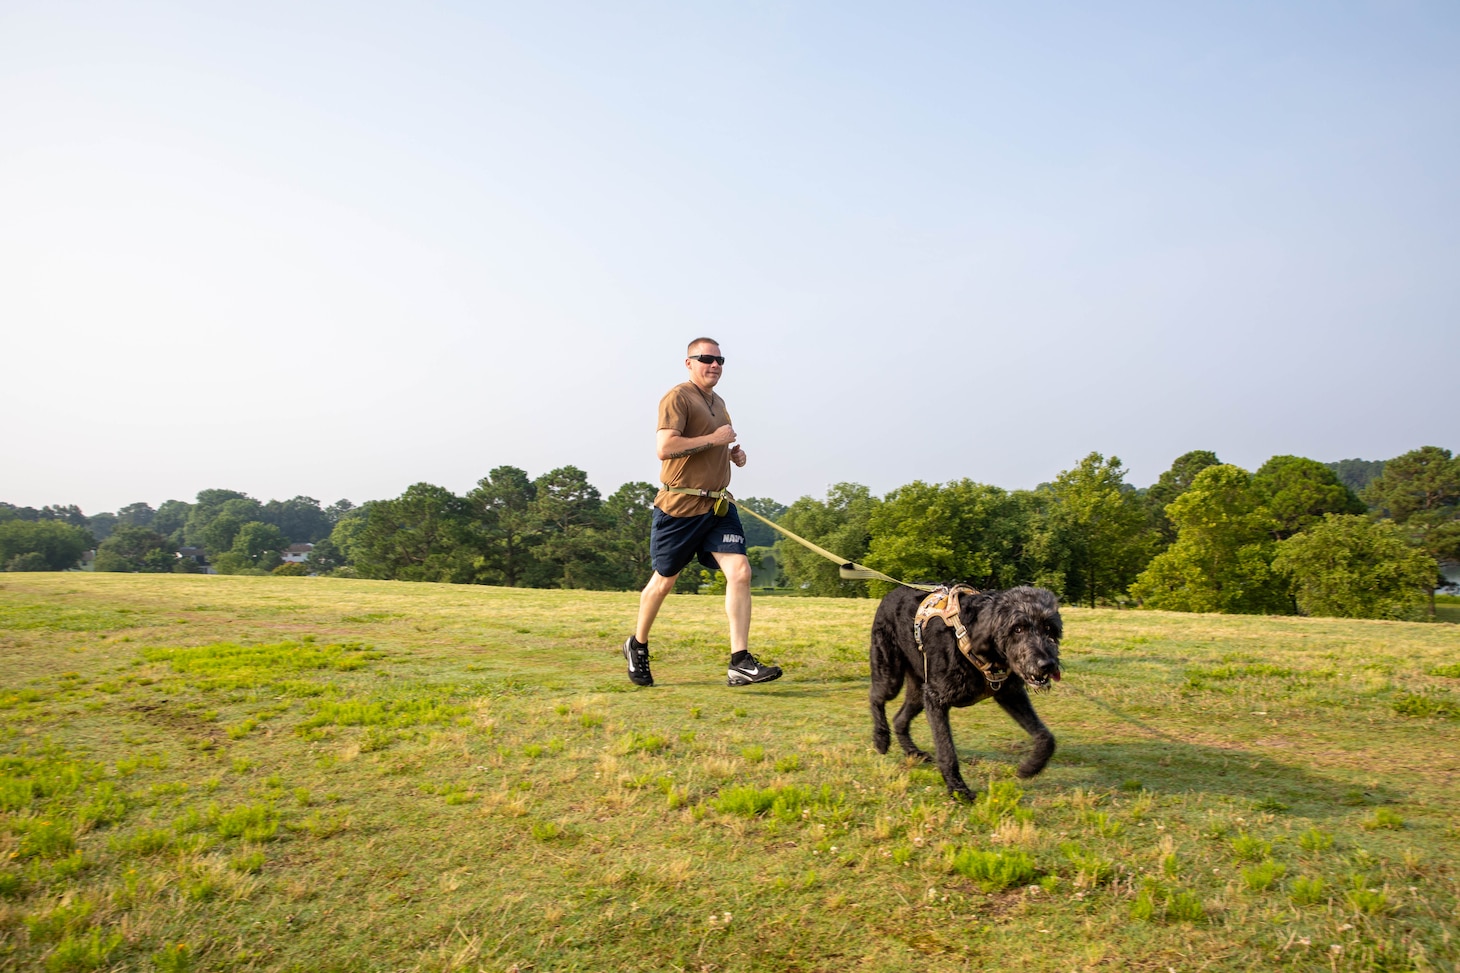 Sailor running on a grass field with his dog